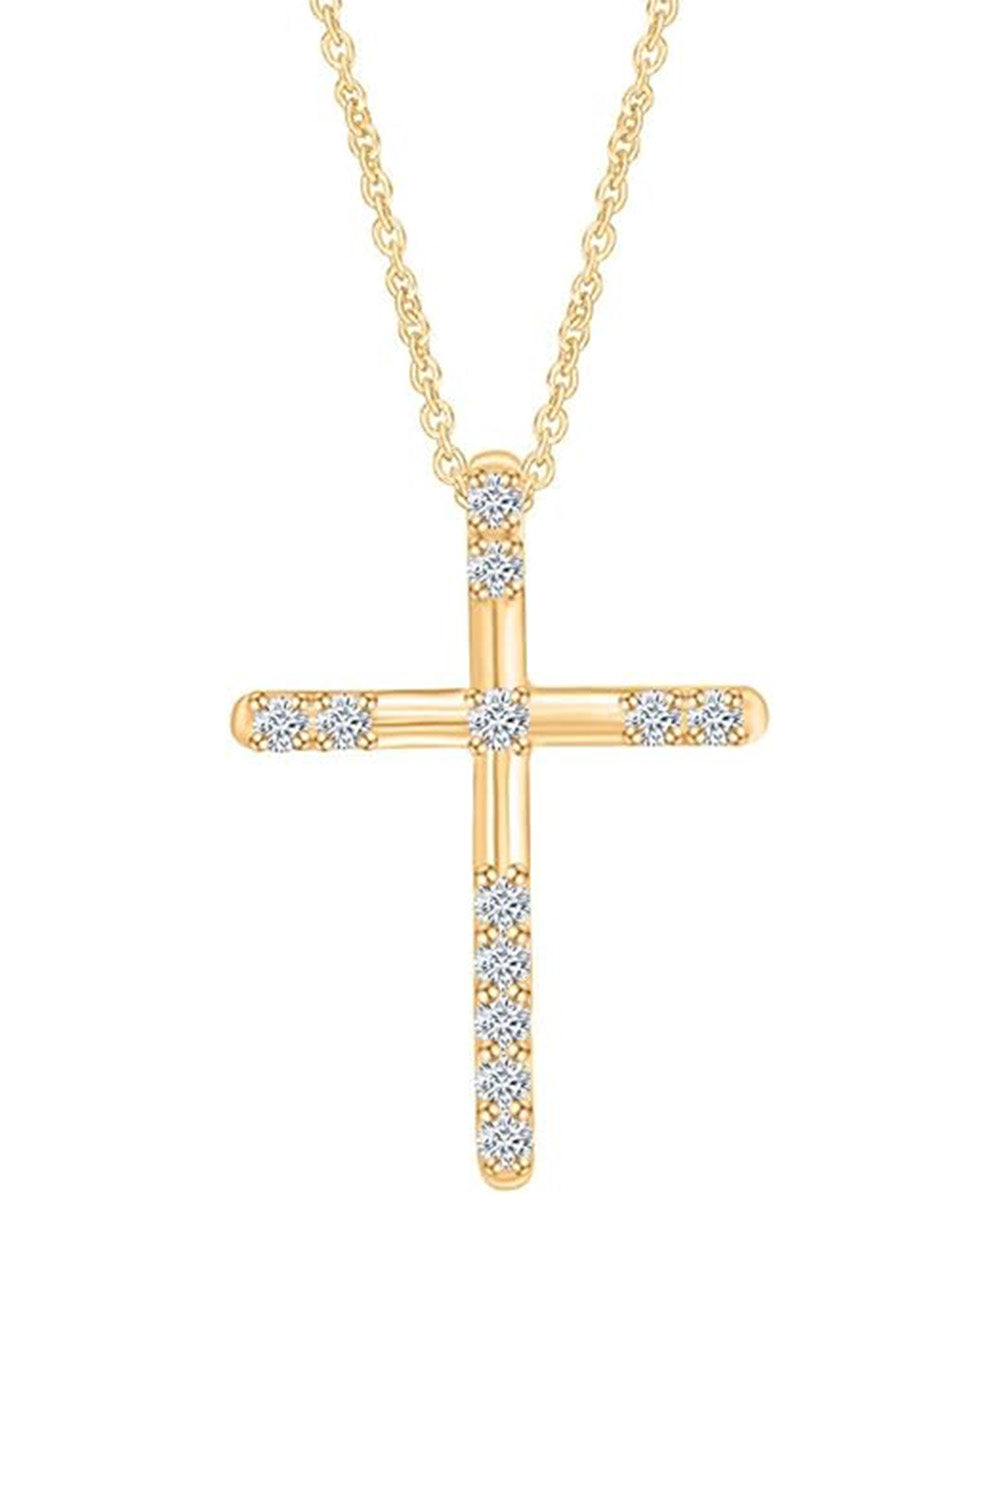 Yellow Gold Color Cross Pendant Necklace for Women, Fashion Jewellery